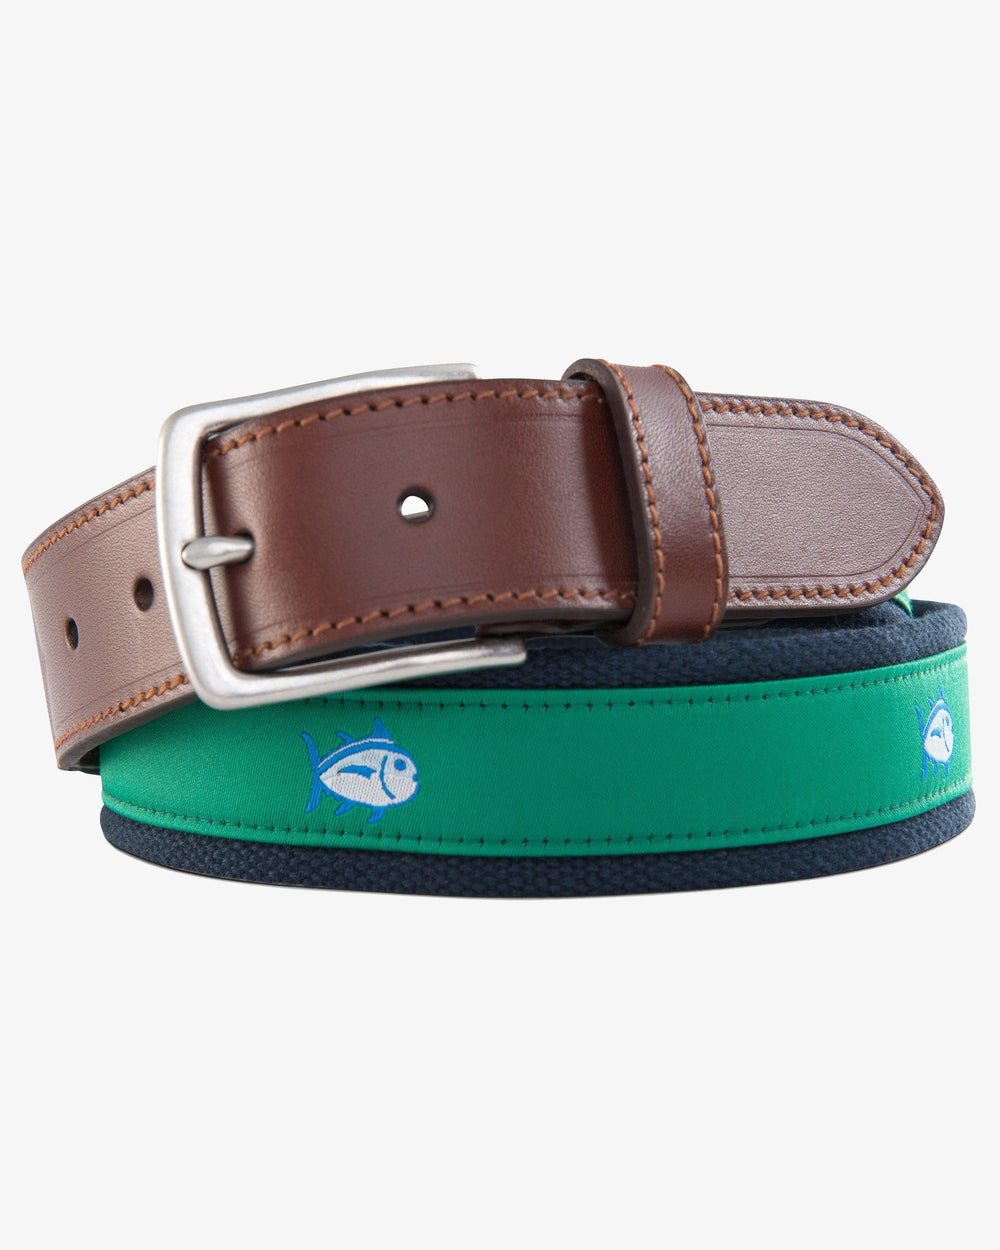 The detail of the Men's Green Skipjack Ribbon Belt by Southern Tide - Augusta Green